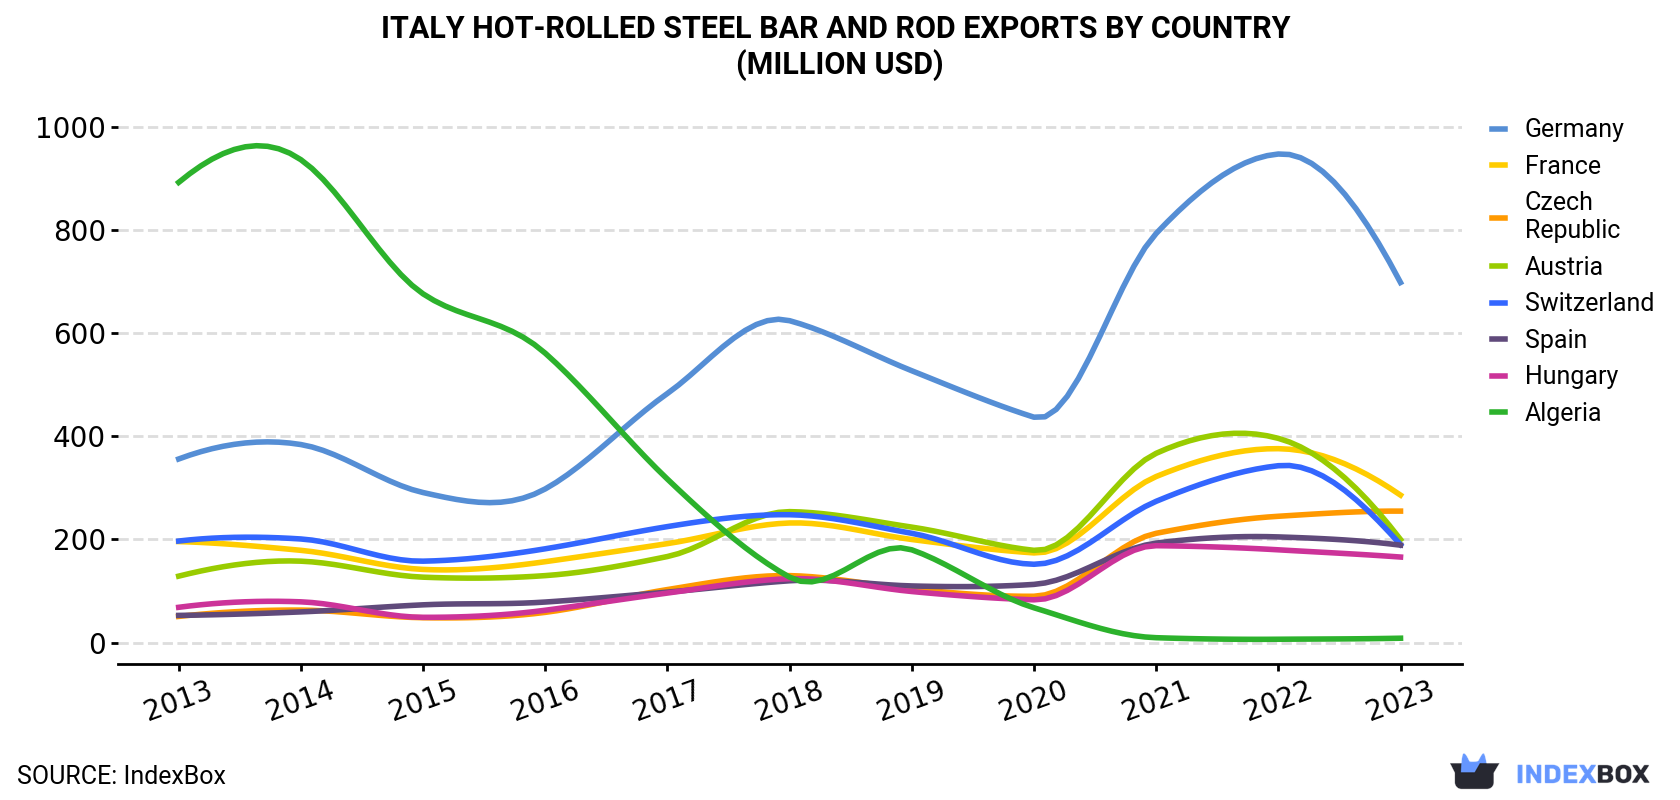 Italy Hot-Rolled Steel Bar and Rod Exports By Country (Million USD)